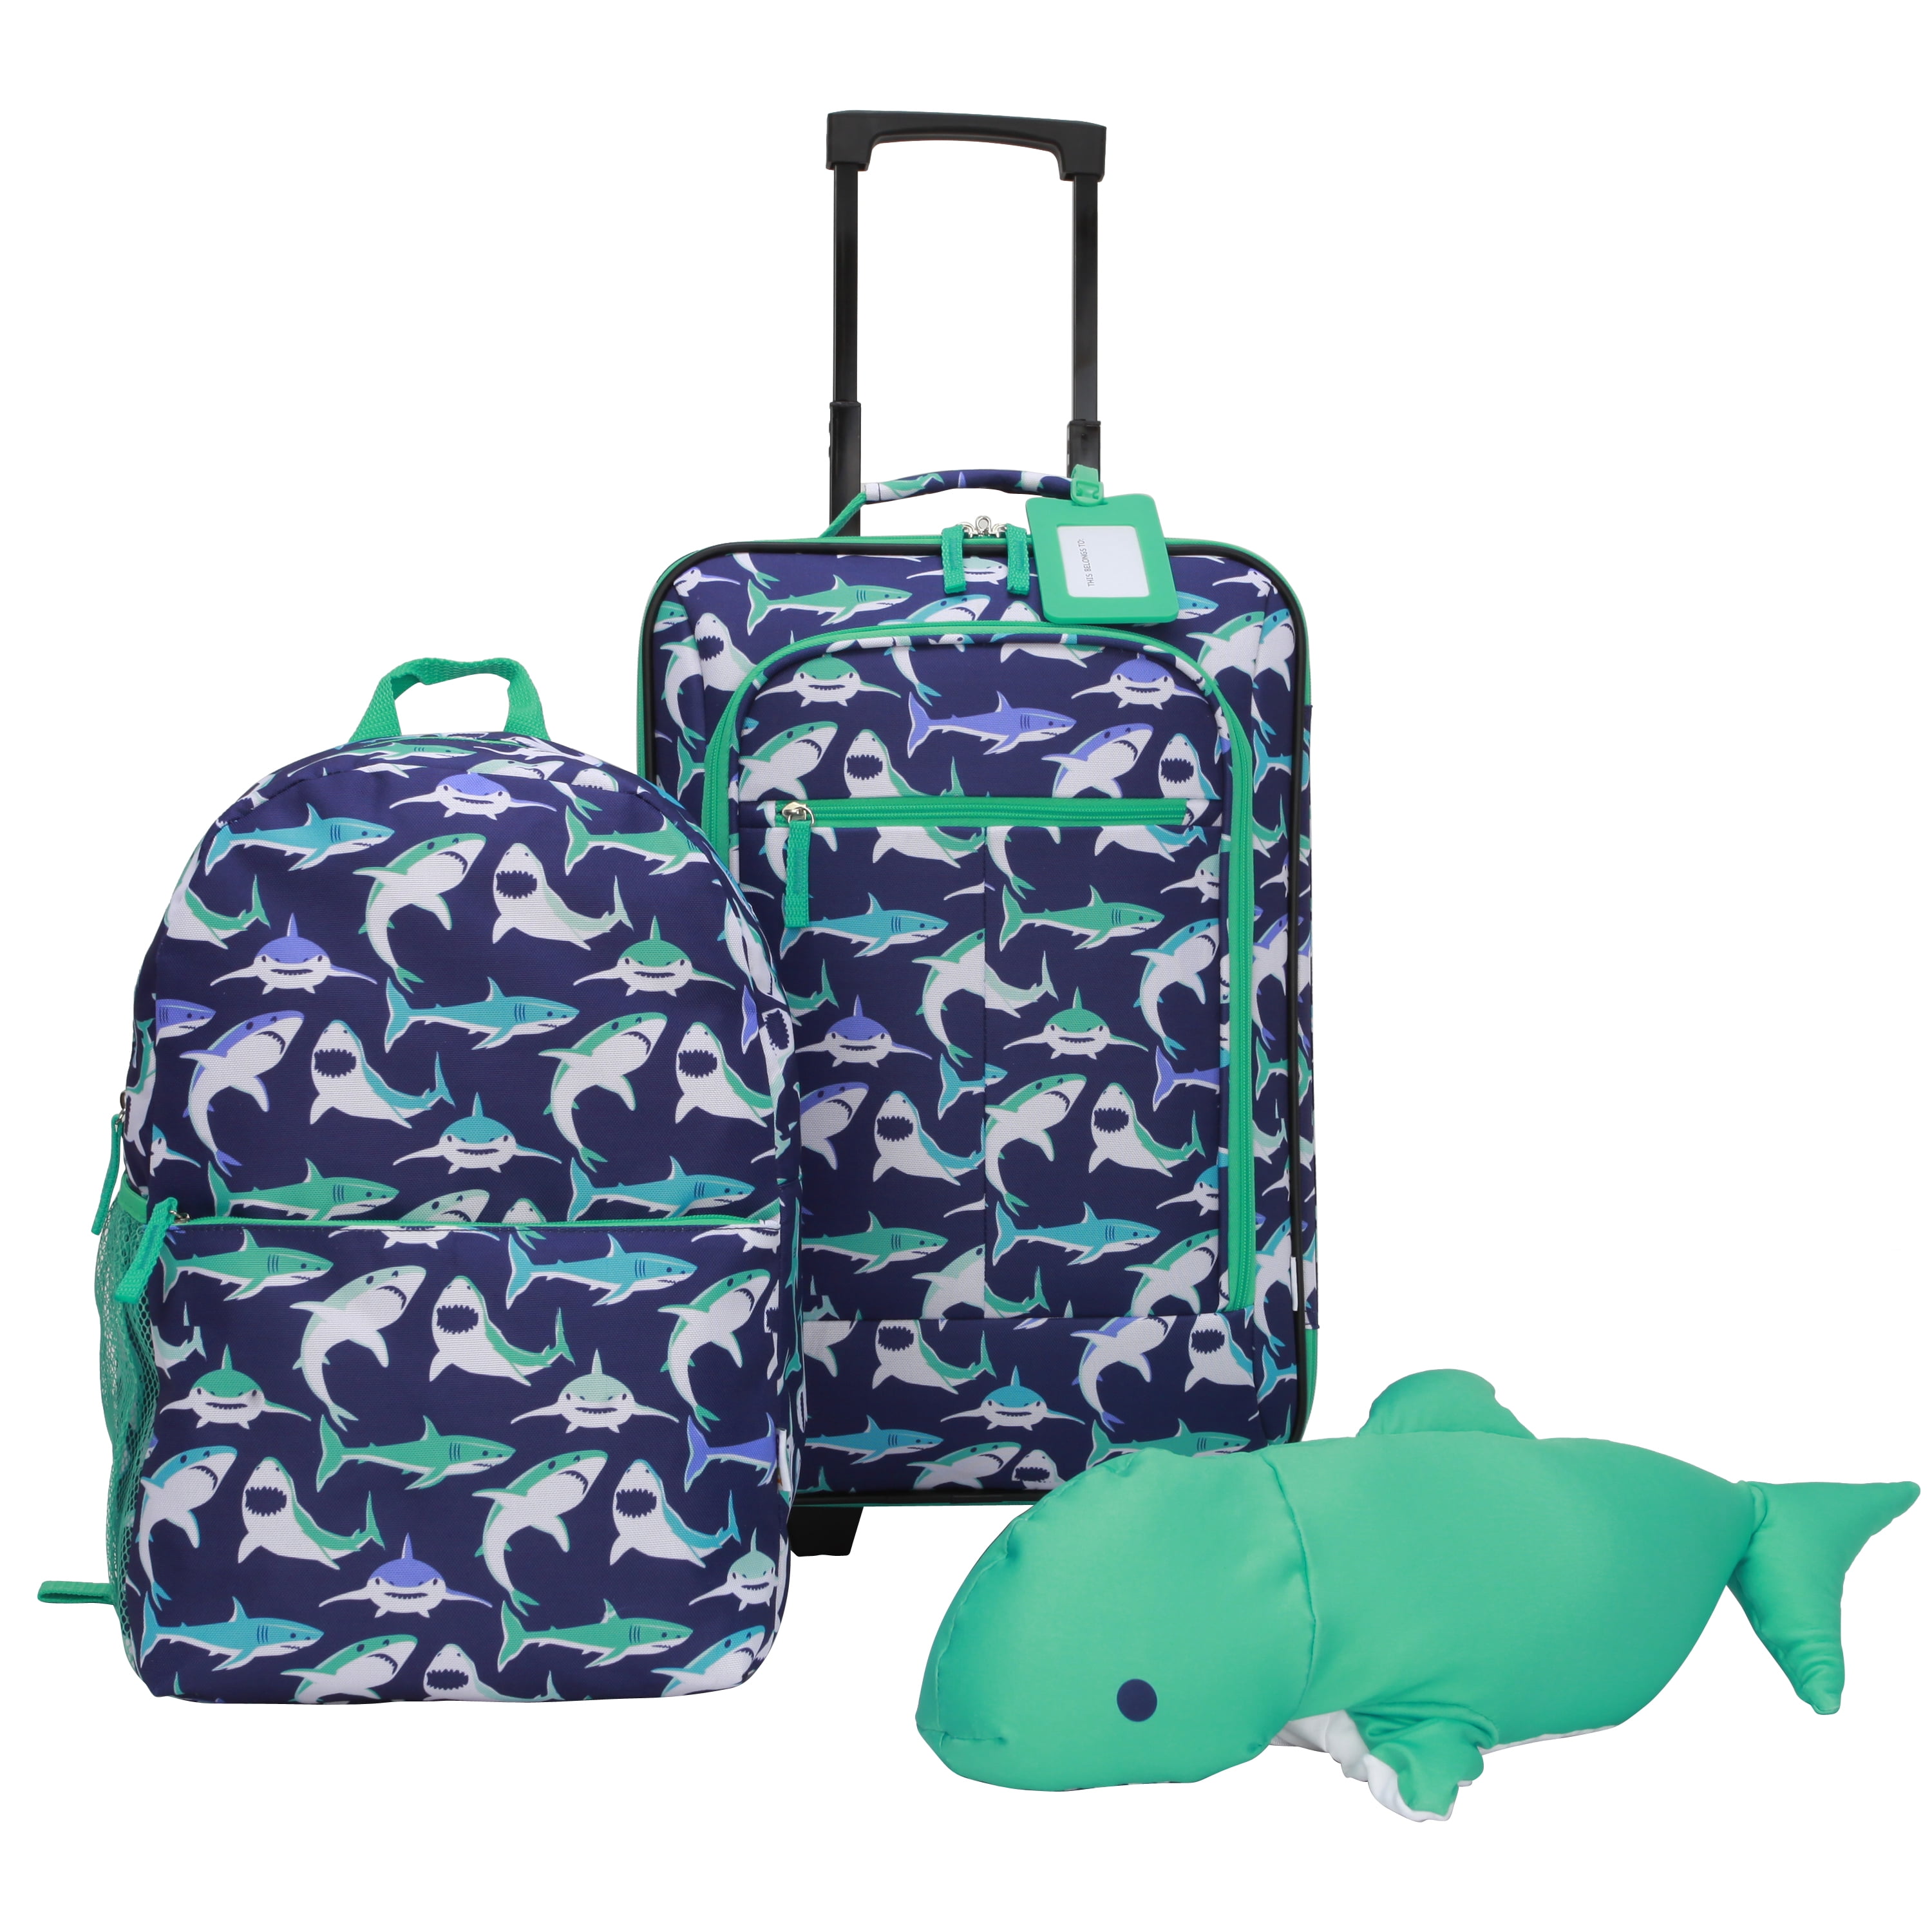 Crckt Kids 18 inch 4 Piece Luggage Set, Shark, ( Exclusive), Size: 18in UR: 18''H x 12.5 inch WX 6.5''Large BACKPACK:15.5IN H x 11in W x